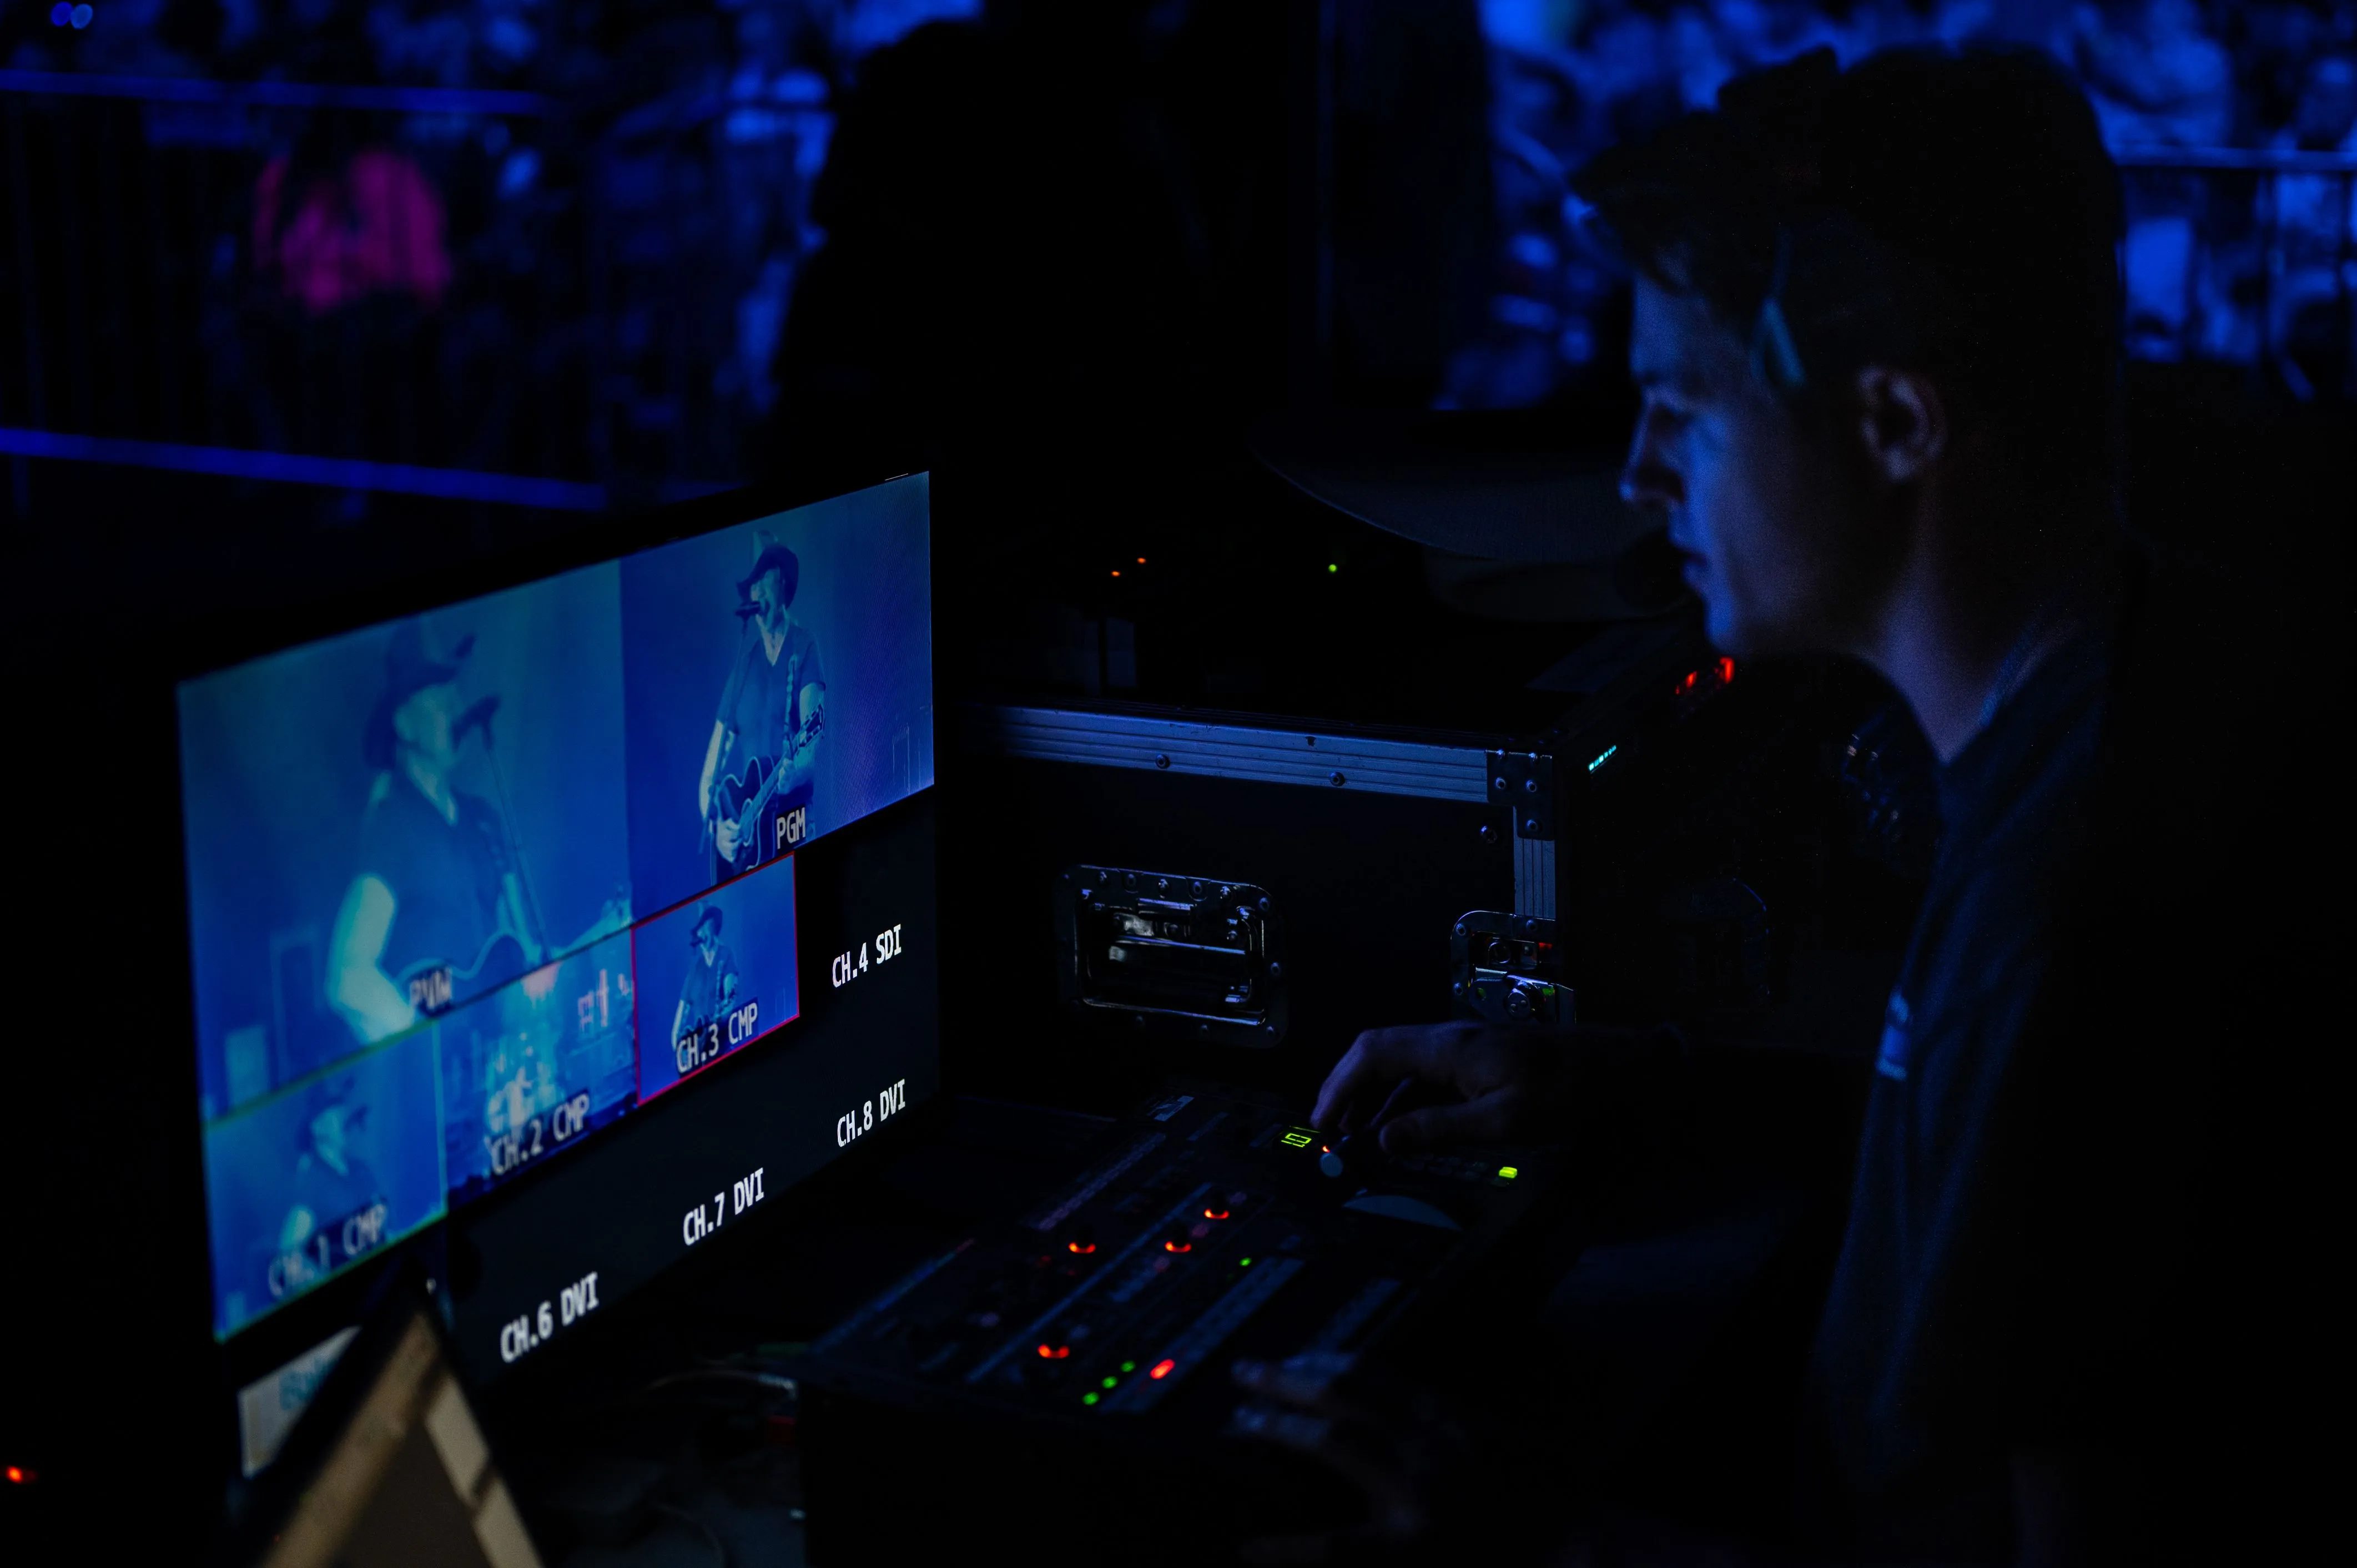 Person working with video equipment in a dark control room with multiple screens displaying images.